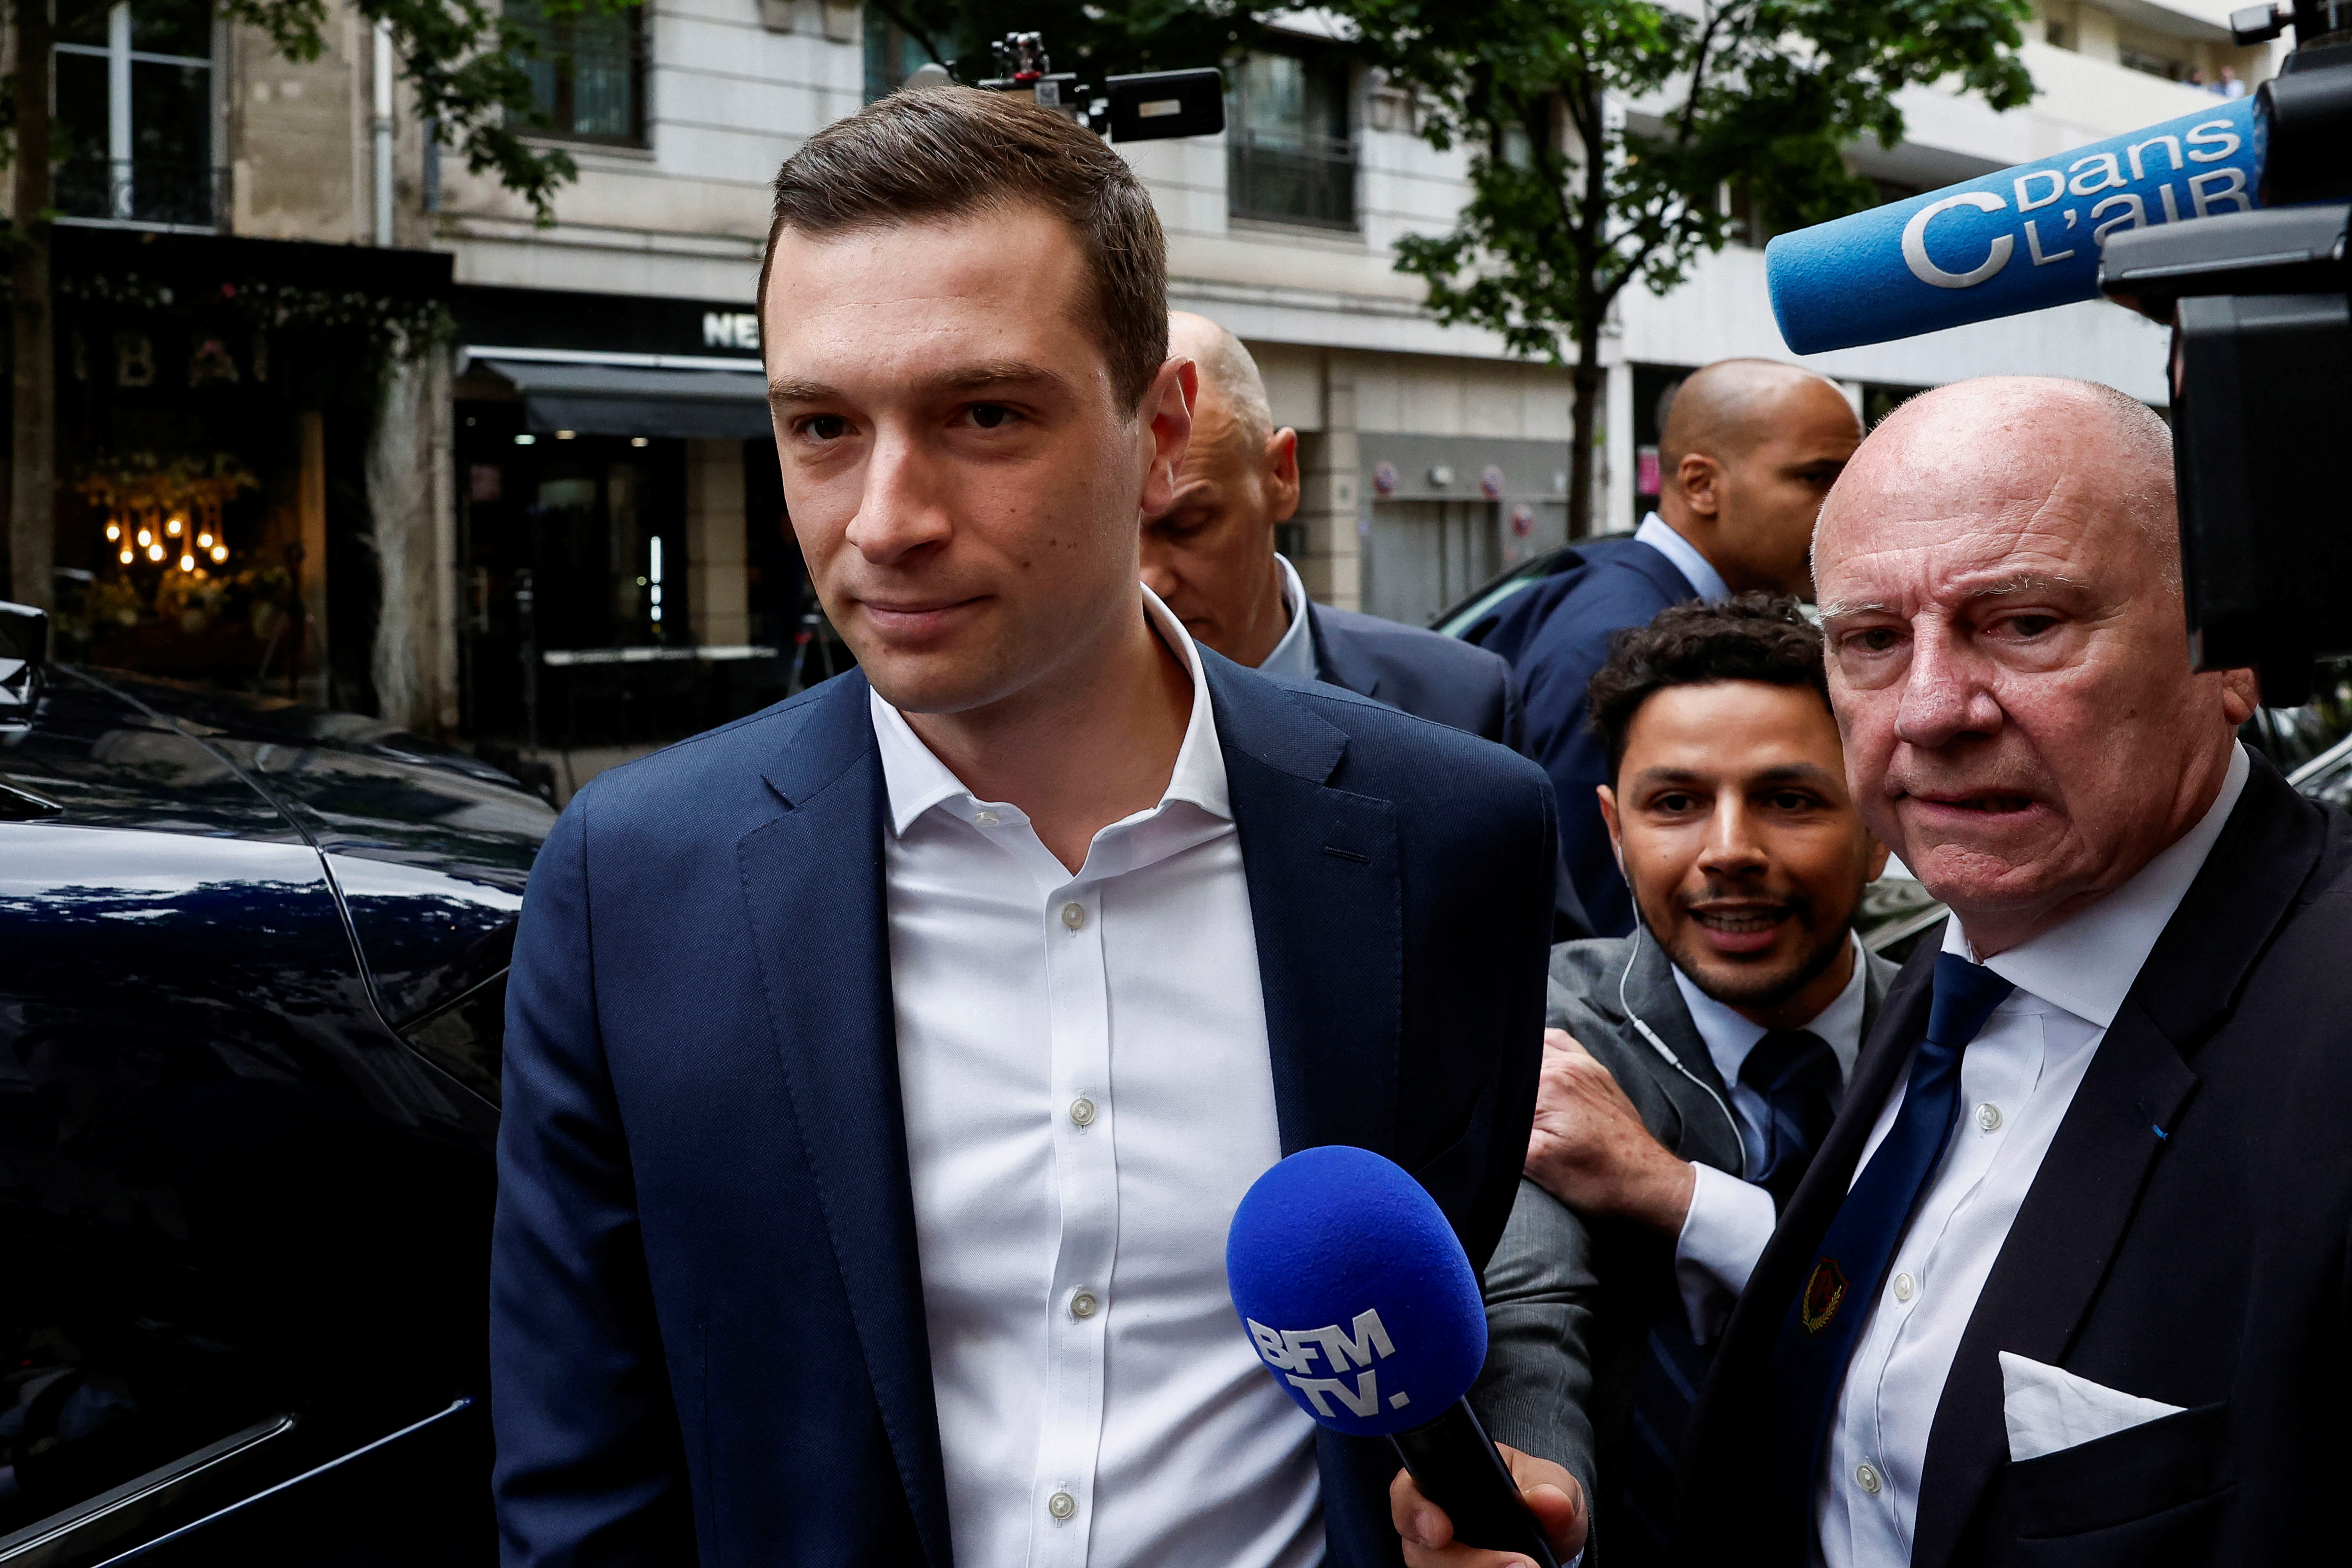 Jordan Bardella, President of the French far-right National Rally arrives at the RN party headquarters in Paris